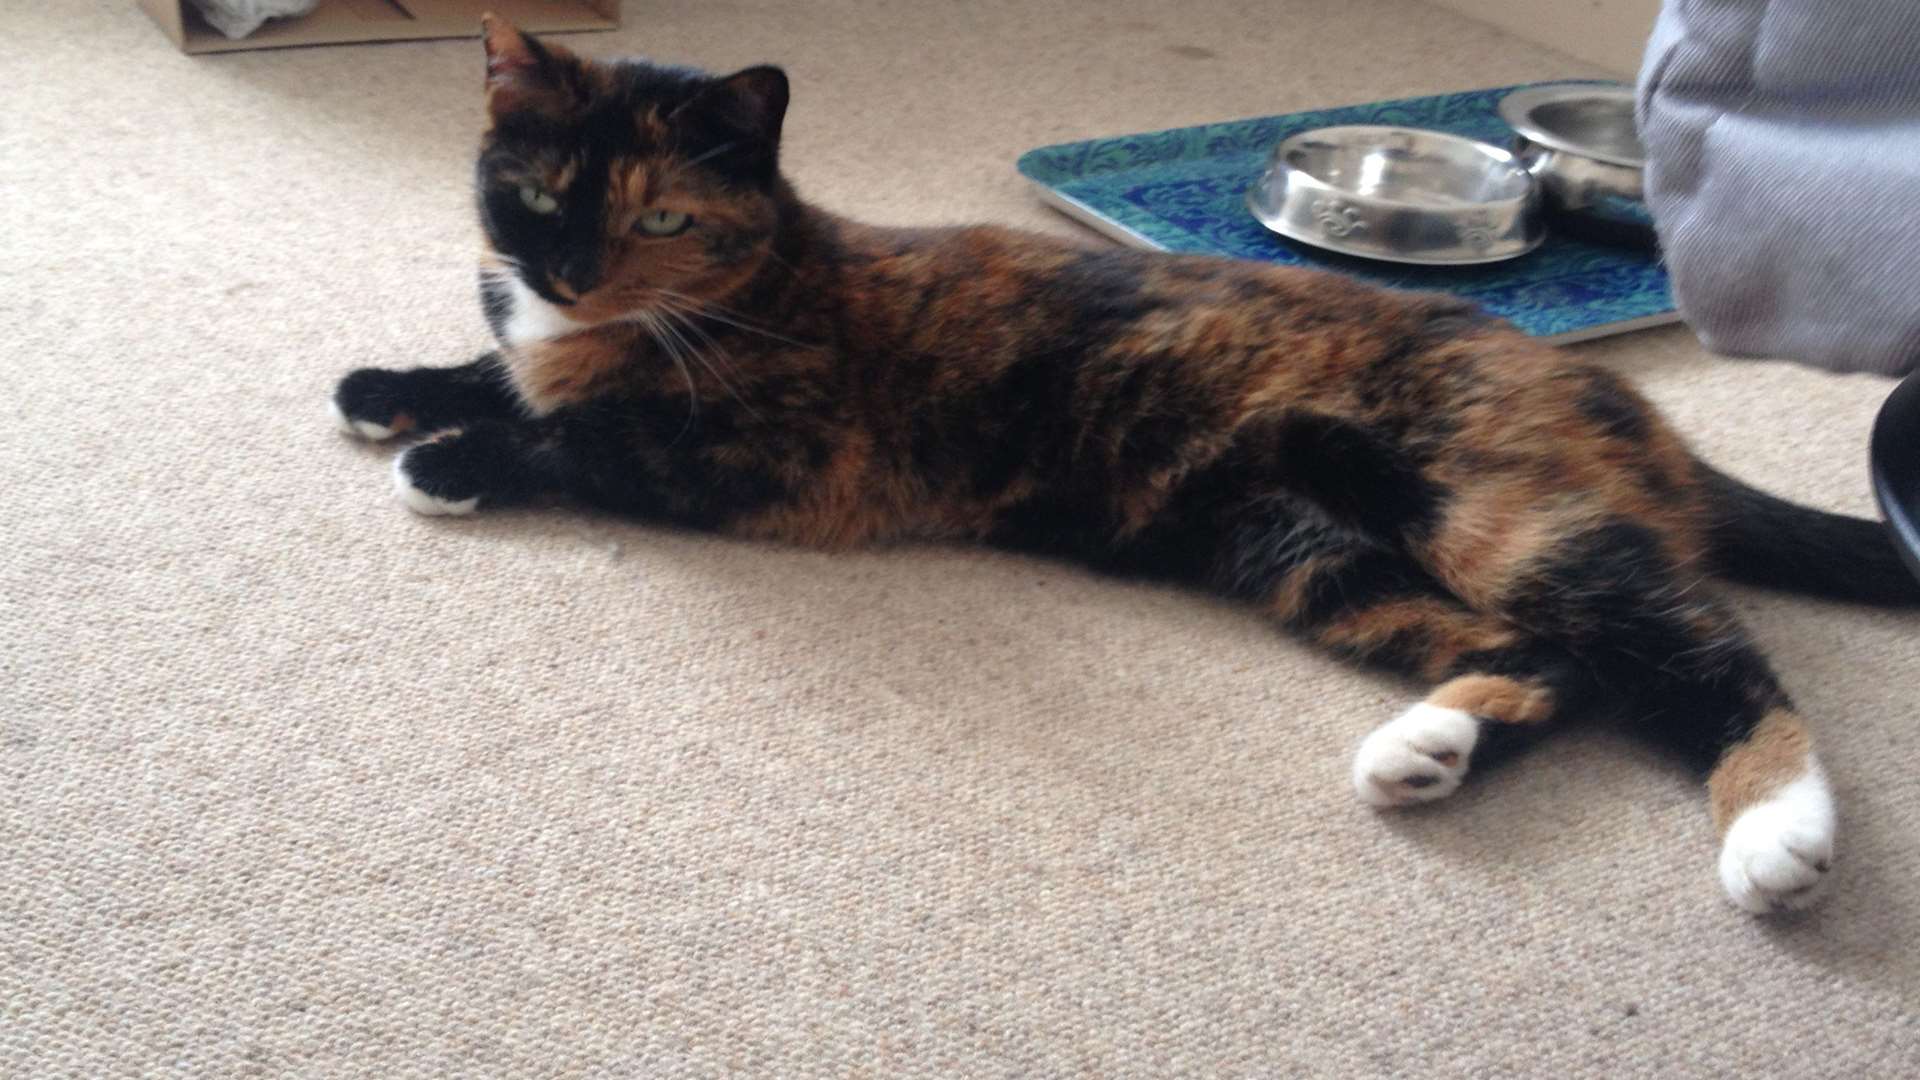 Suki is the Brand Hatch's longest staying resident and has been looking for a permanent home for more than 100 days. Picture: Battersea Dogs & Cats Home